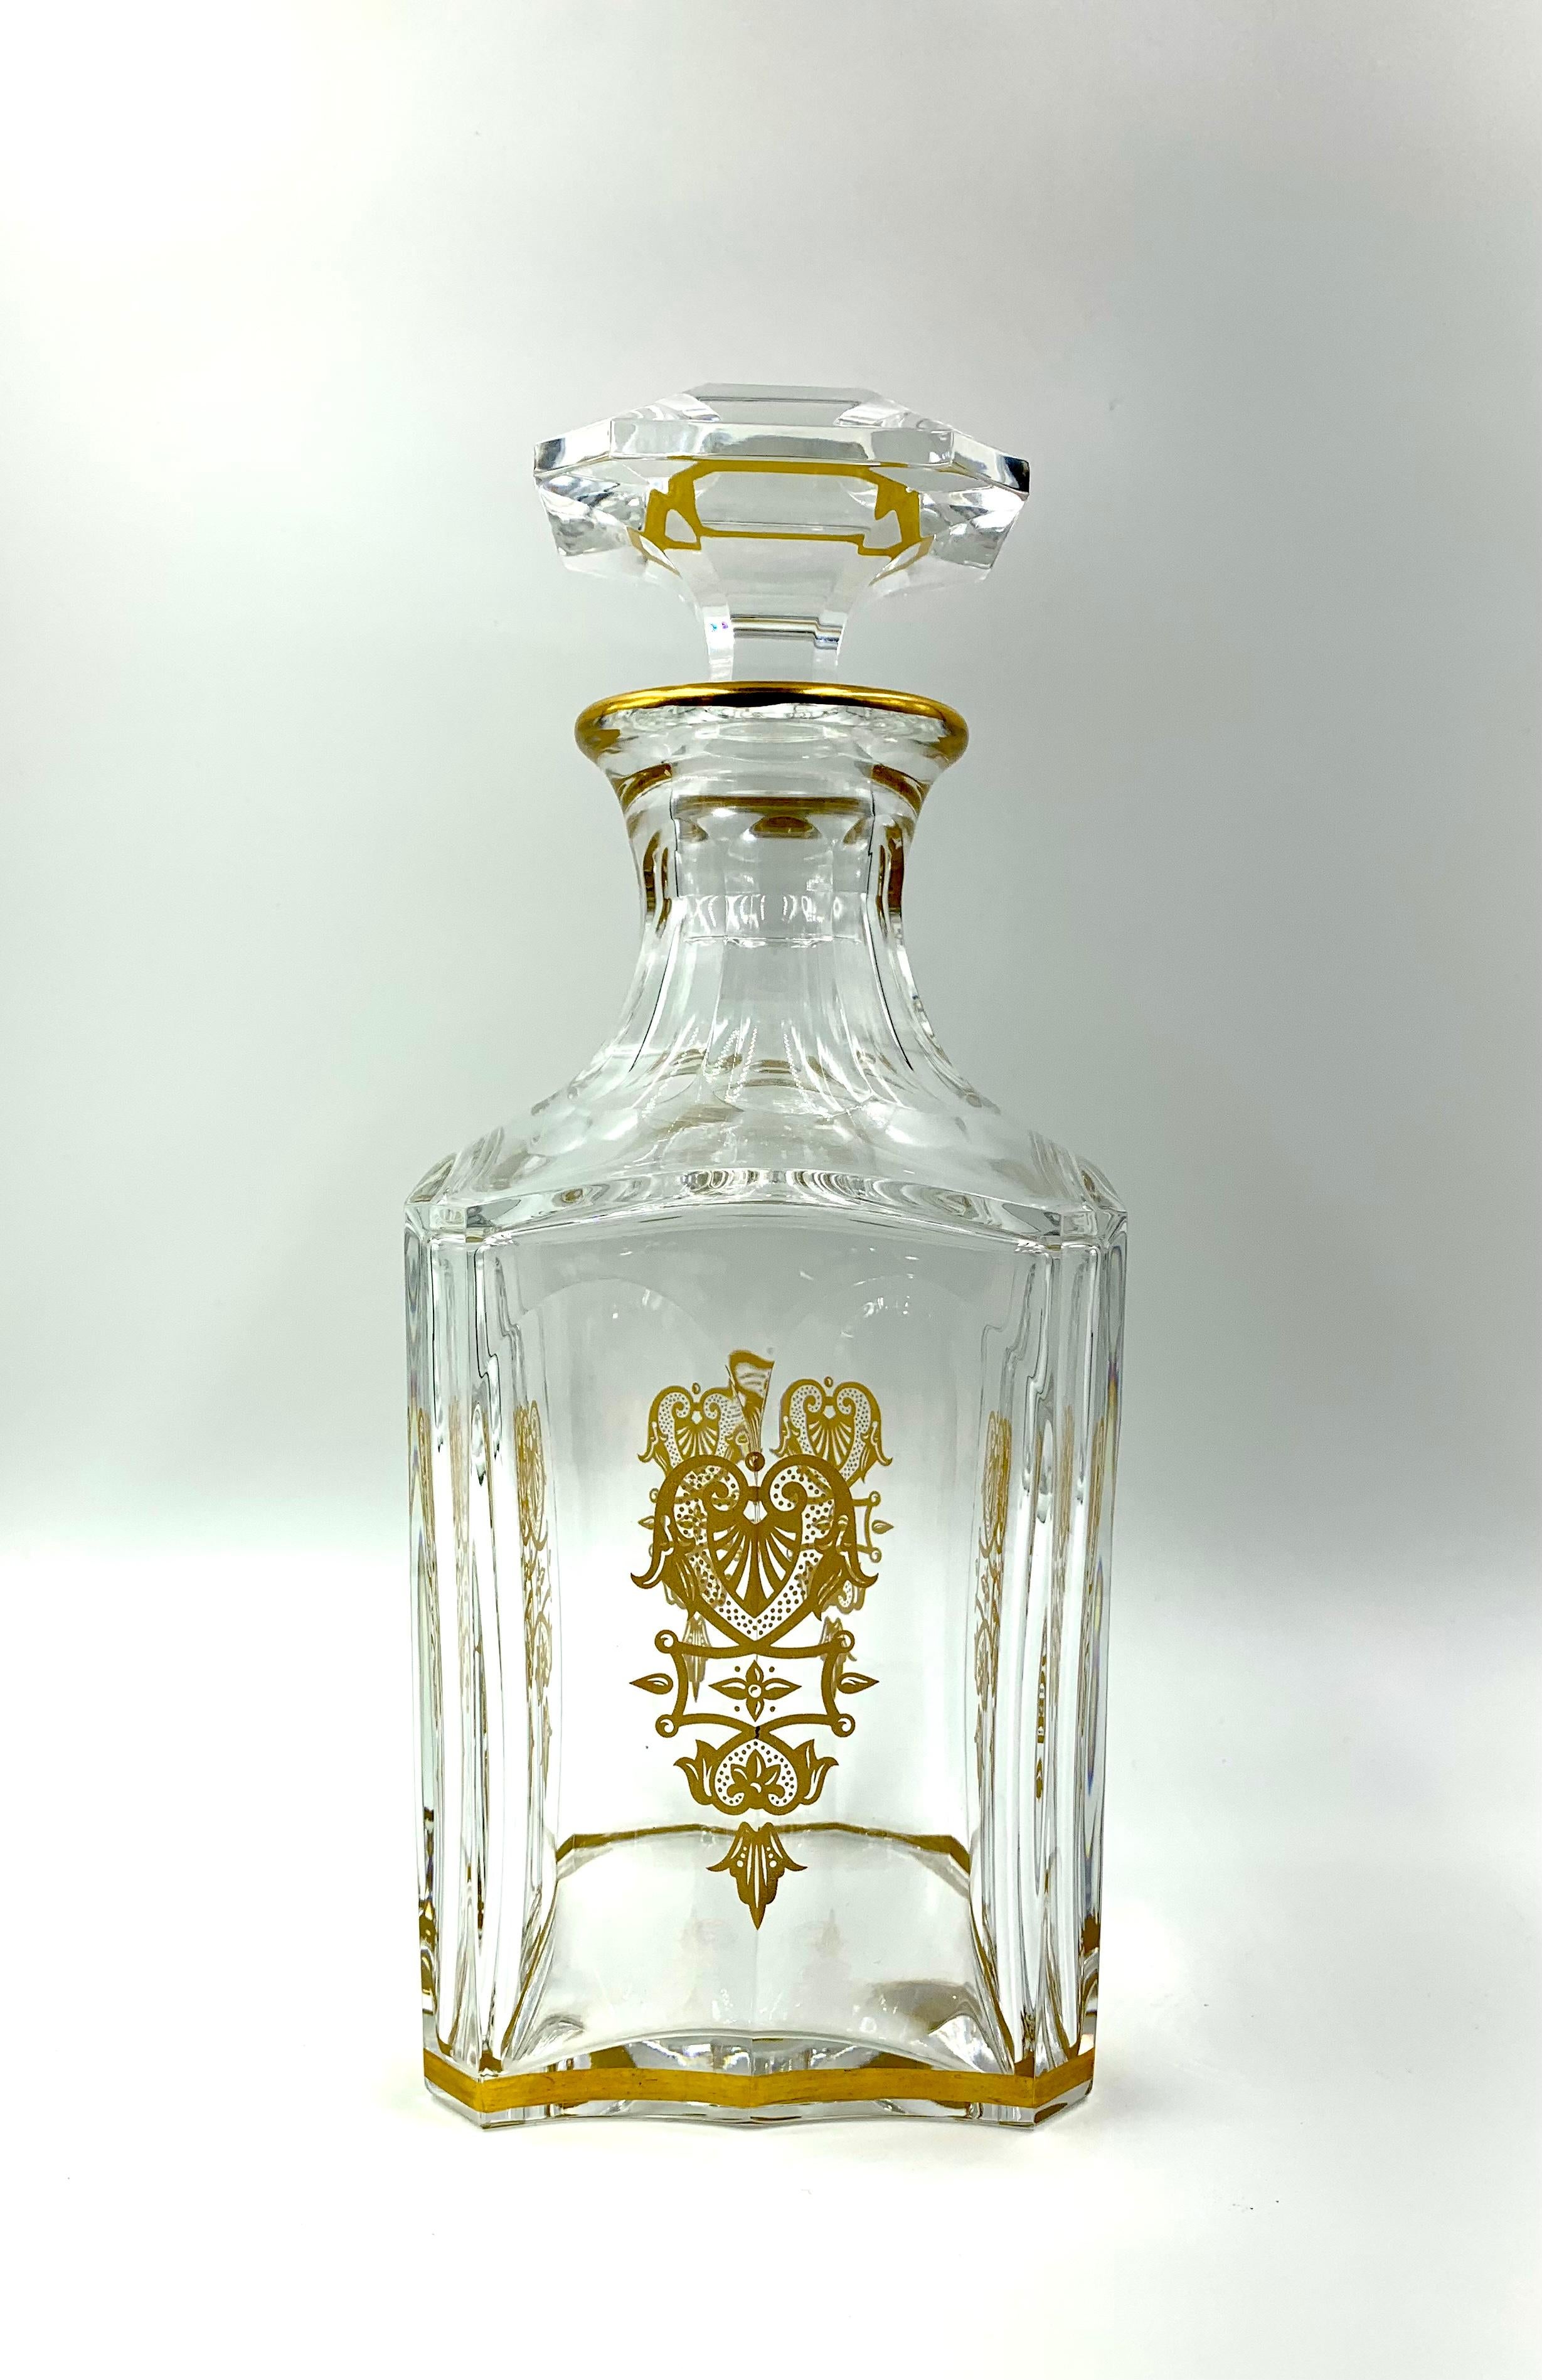 Pristine condition Harcourt Empire 1841 whiskey decanter.
Luxurious, beautifully proportioned, elegant gilt decoration, well balanced weight. A perfect complement for the finest whisky. 
Signed on the base, side and stopper.
A timeless classic by